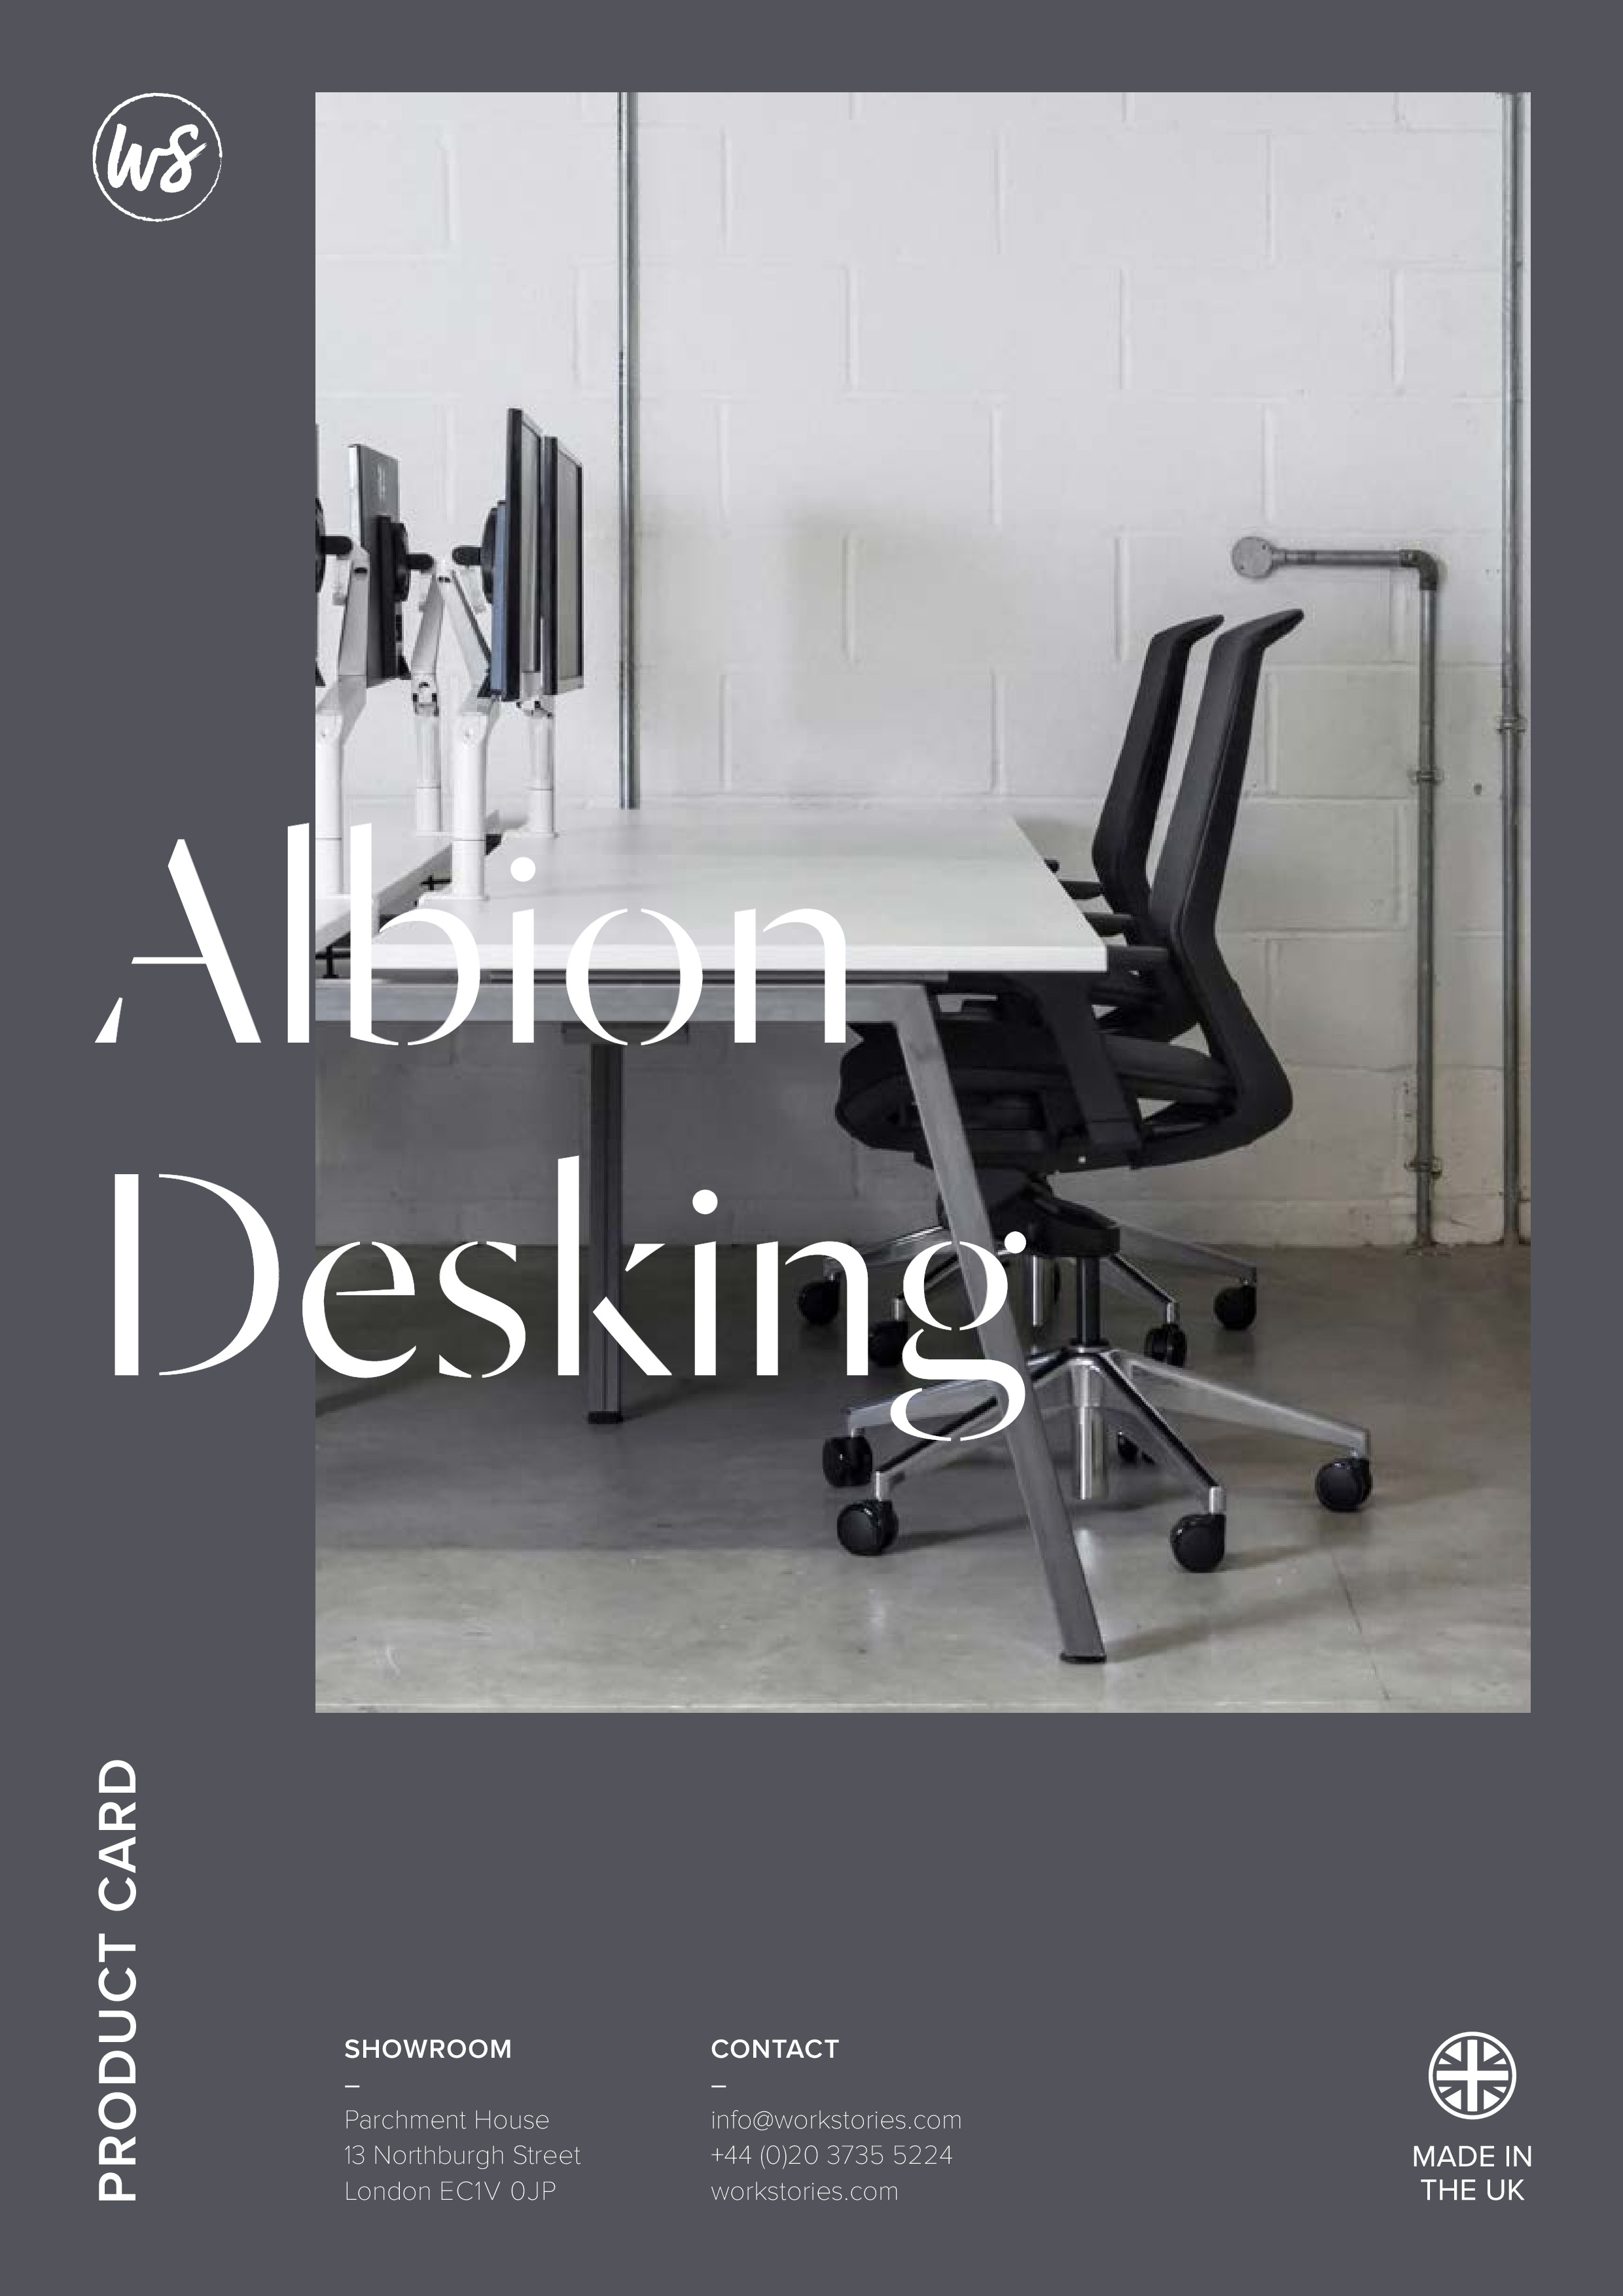 WS - Albion Desking - Product card